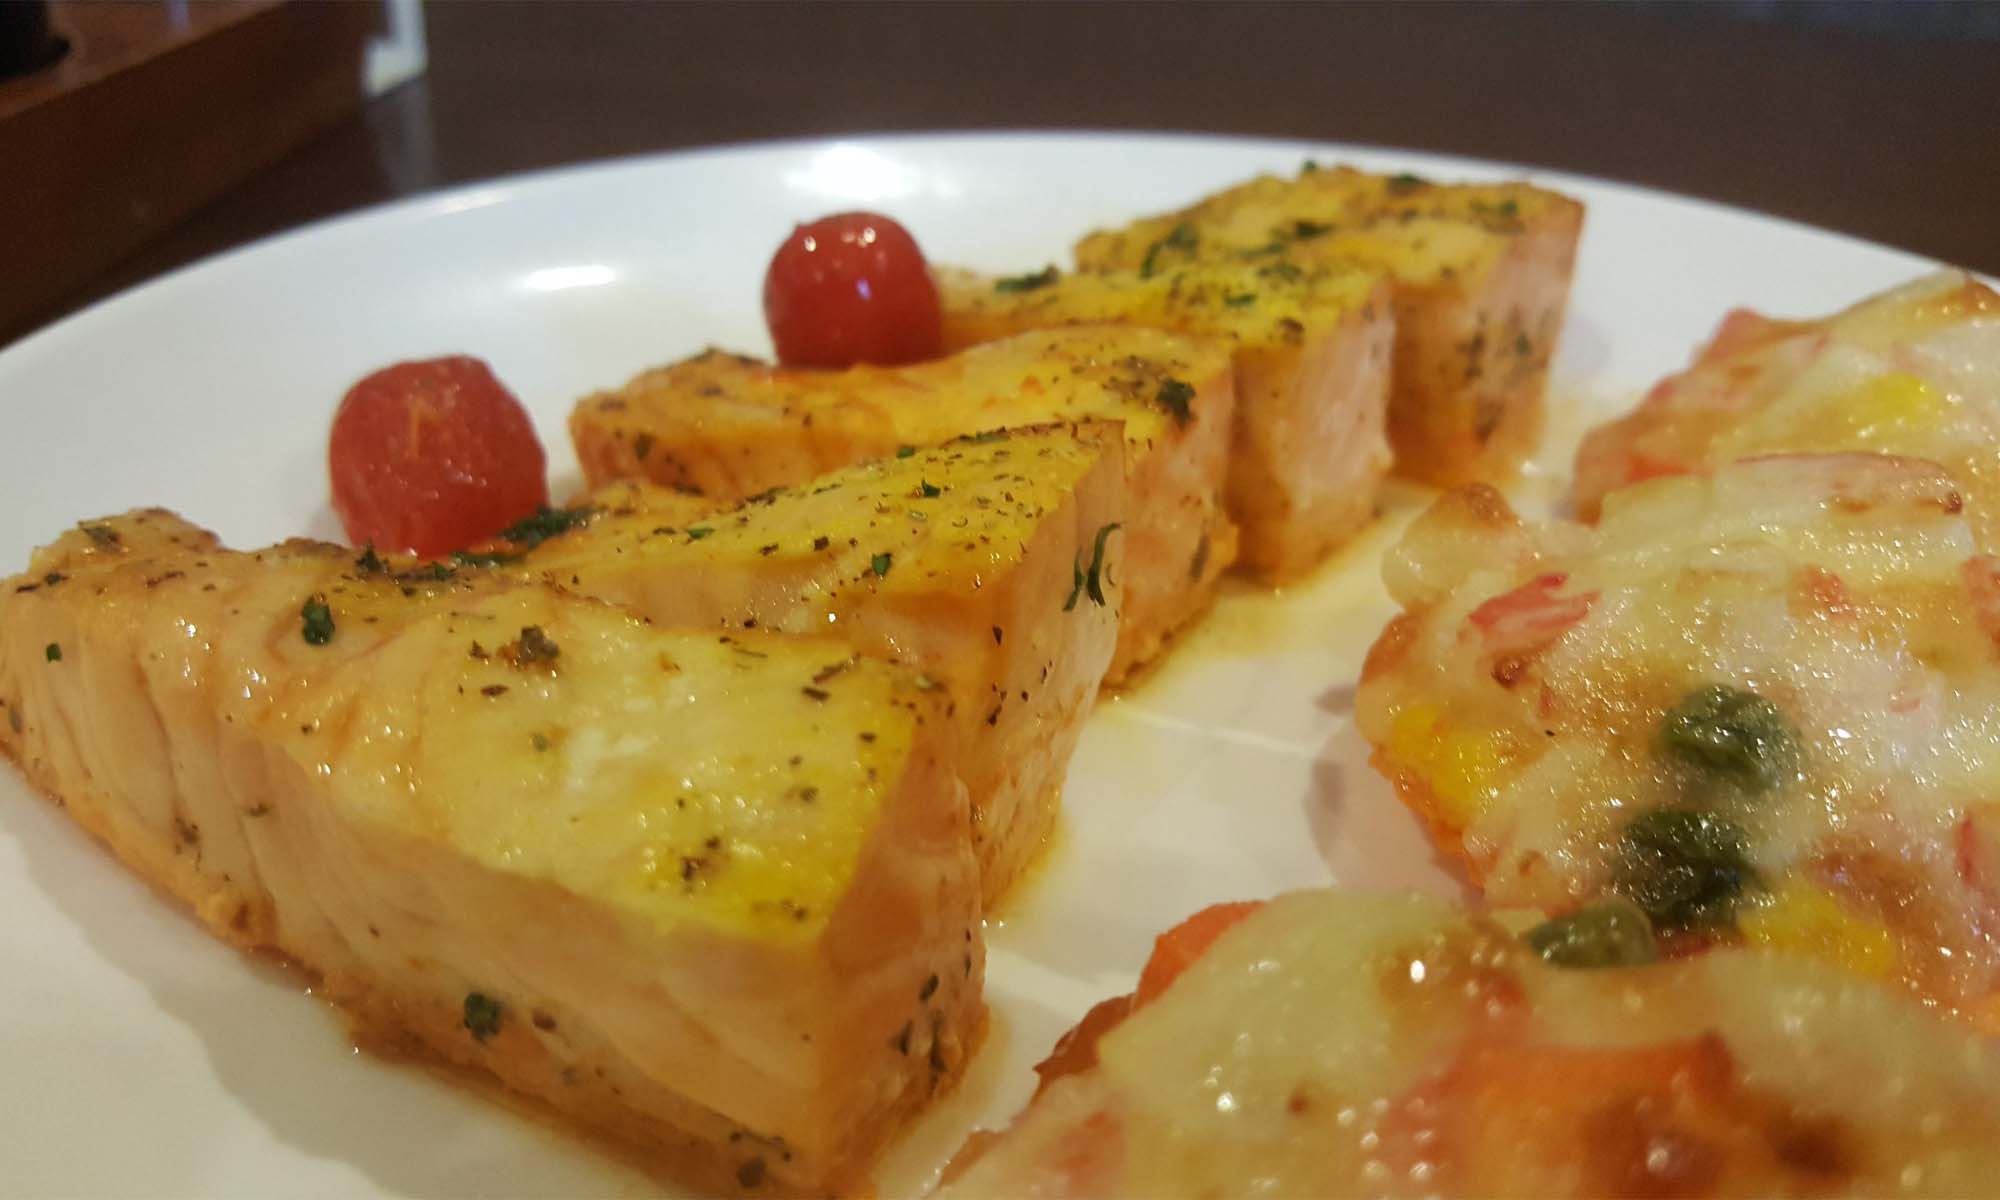 baked salmon topped with cherry tomato